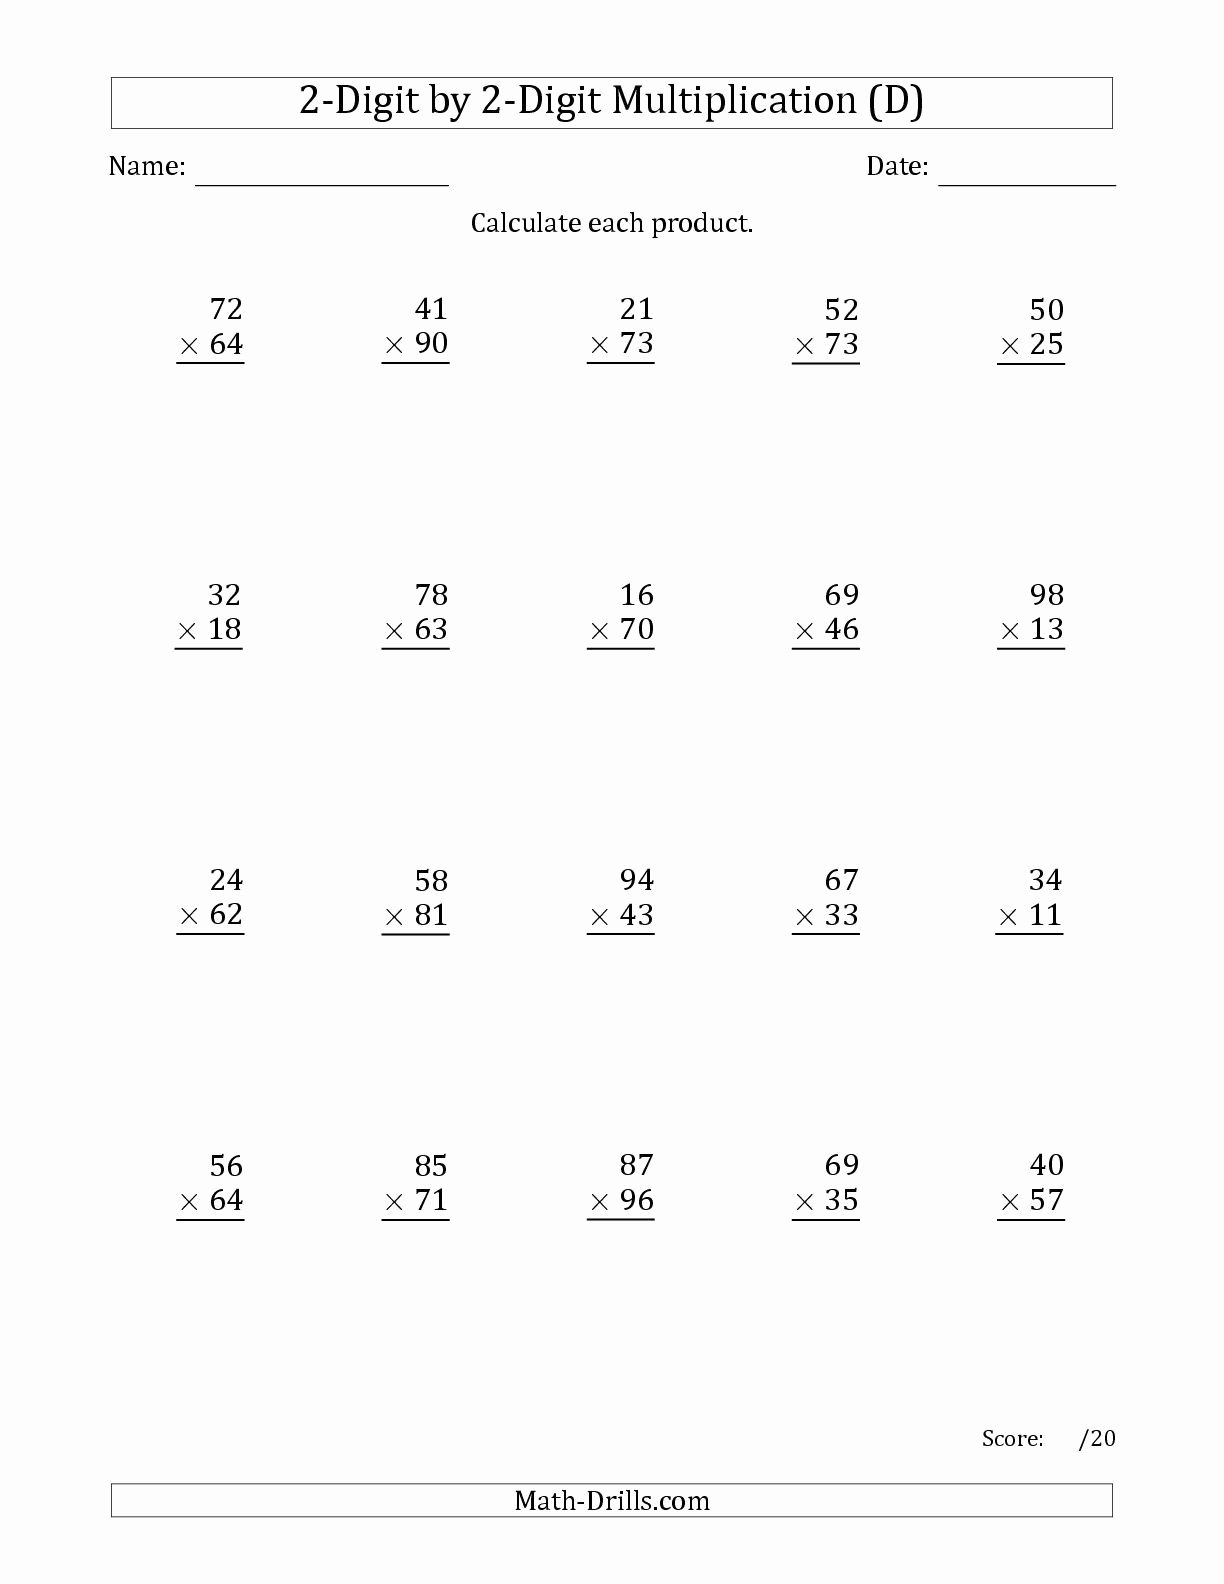 Multiplication and Division Worksheets Lovely the Multiplying 2 Digit by 2 Digit Numbers D Math